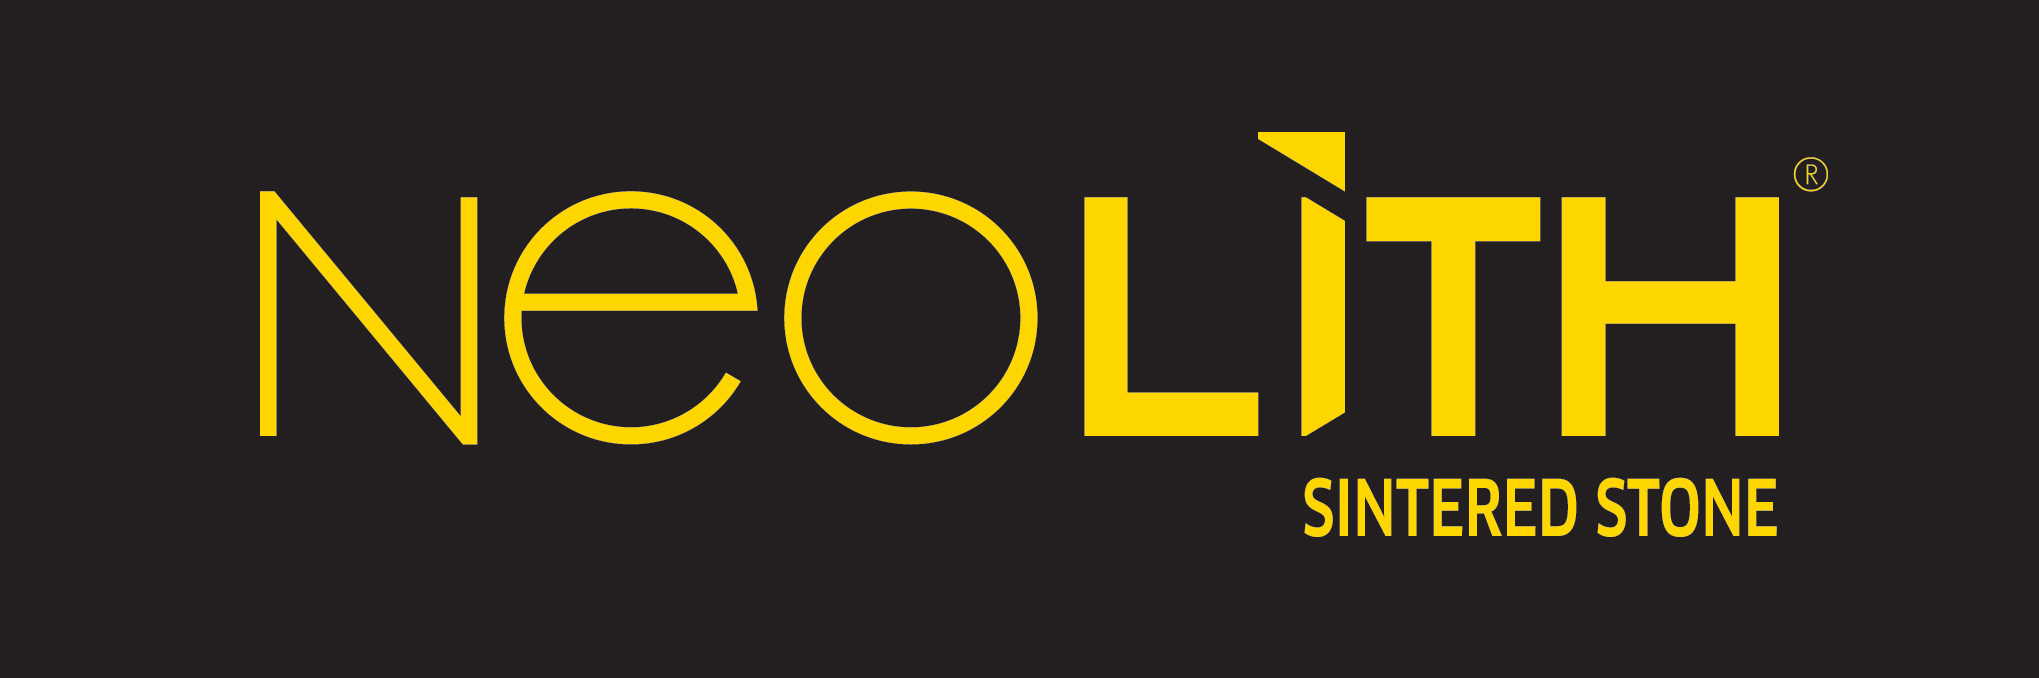 Neolith by The Size logo.